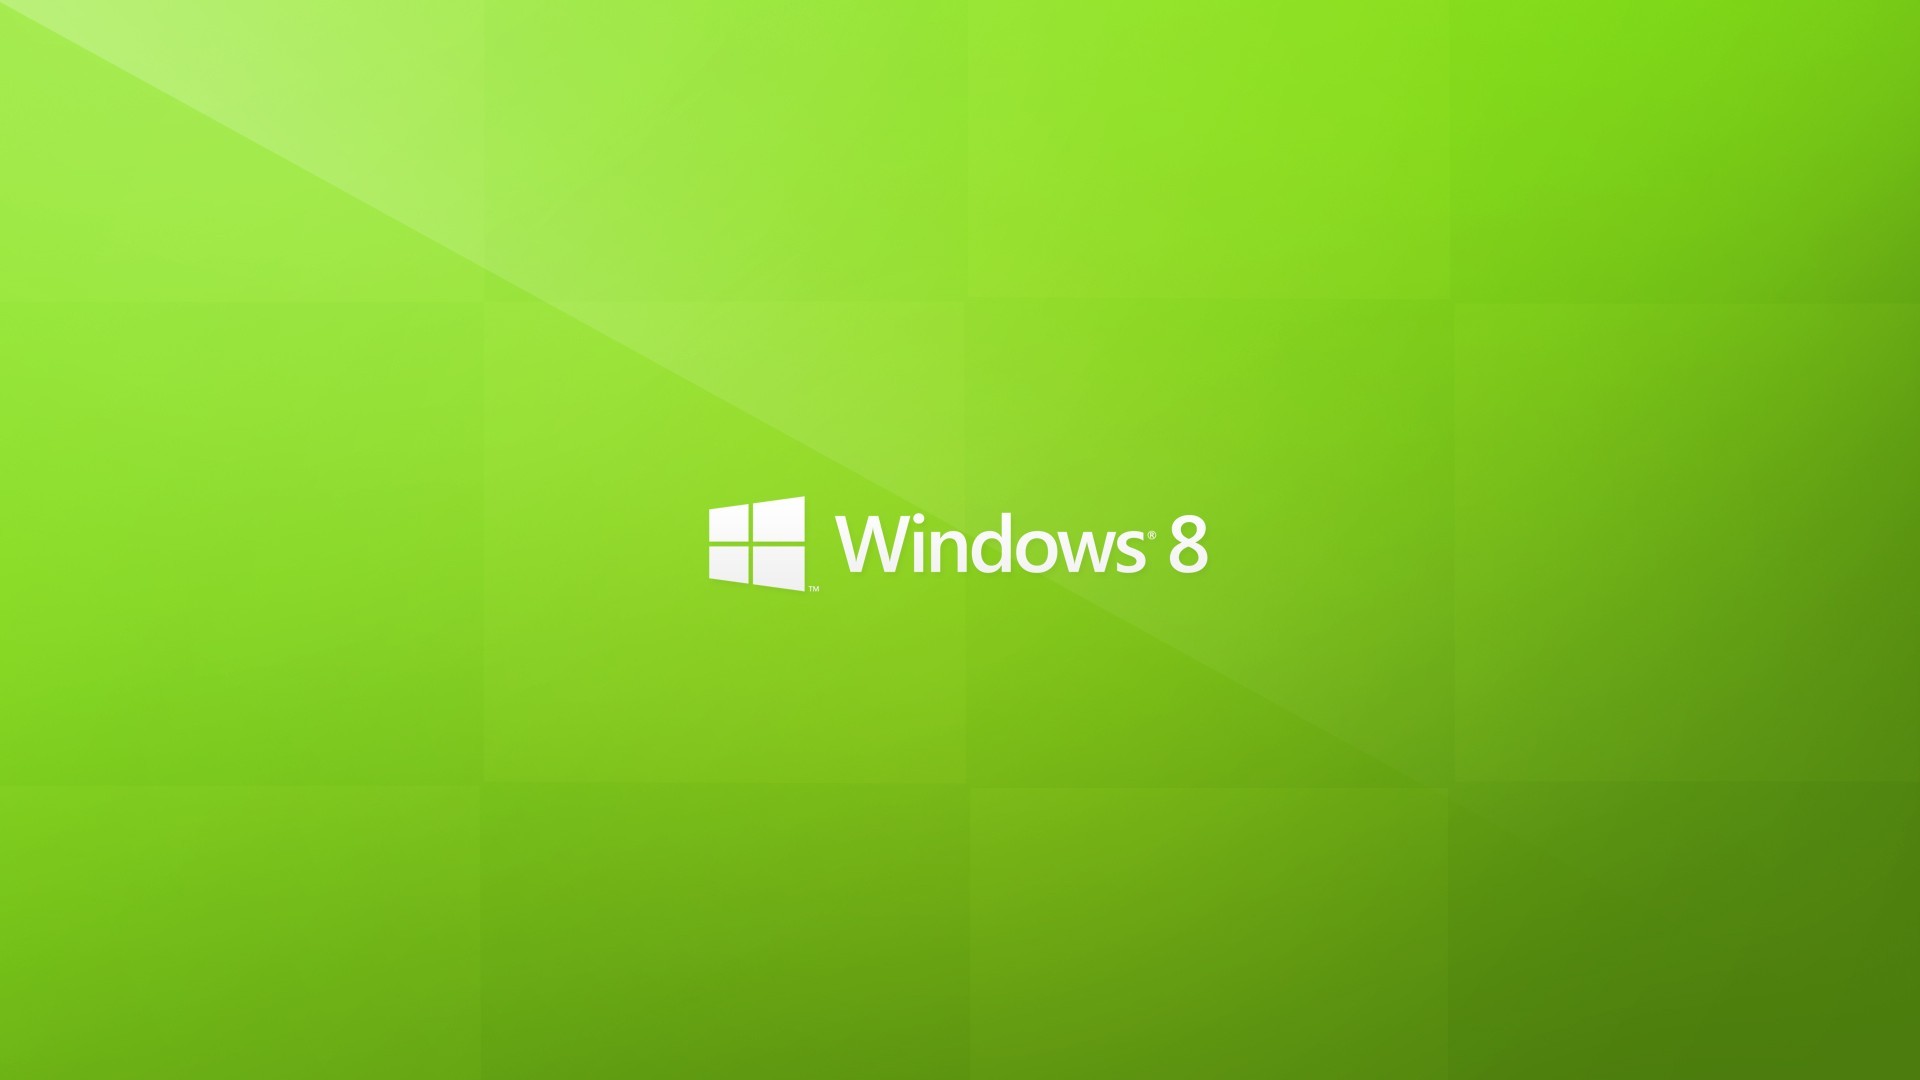 1920x1080 Download These 44 HD Windows 8 Wallpaper Images 5